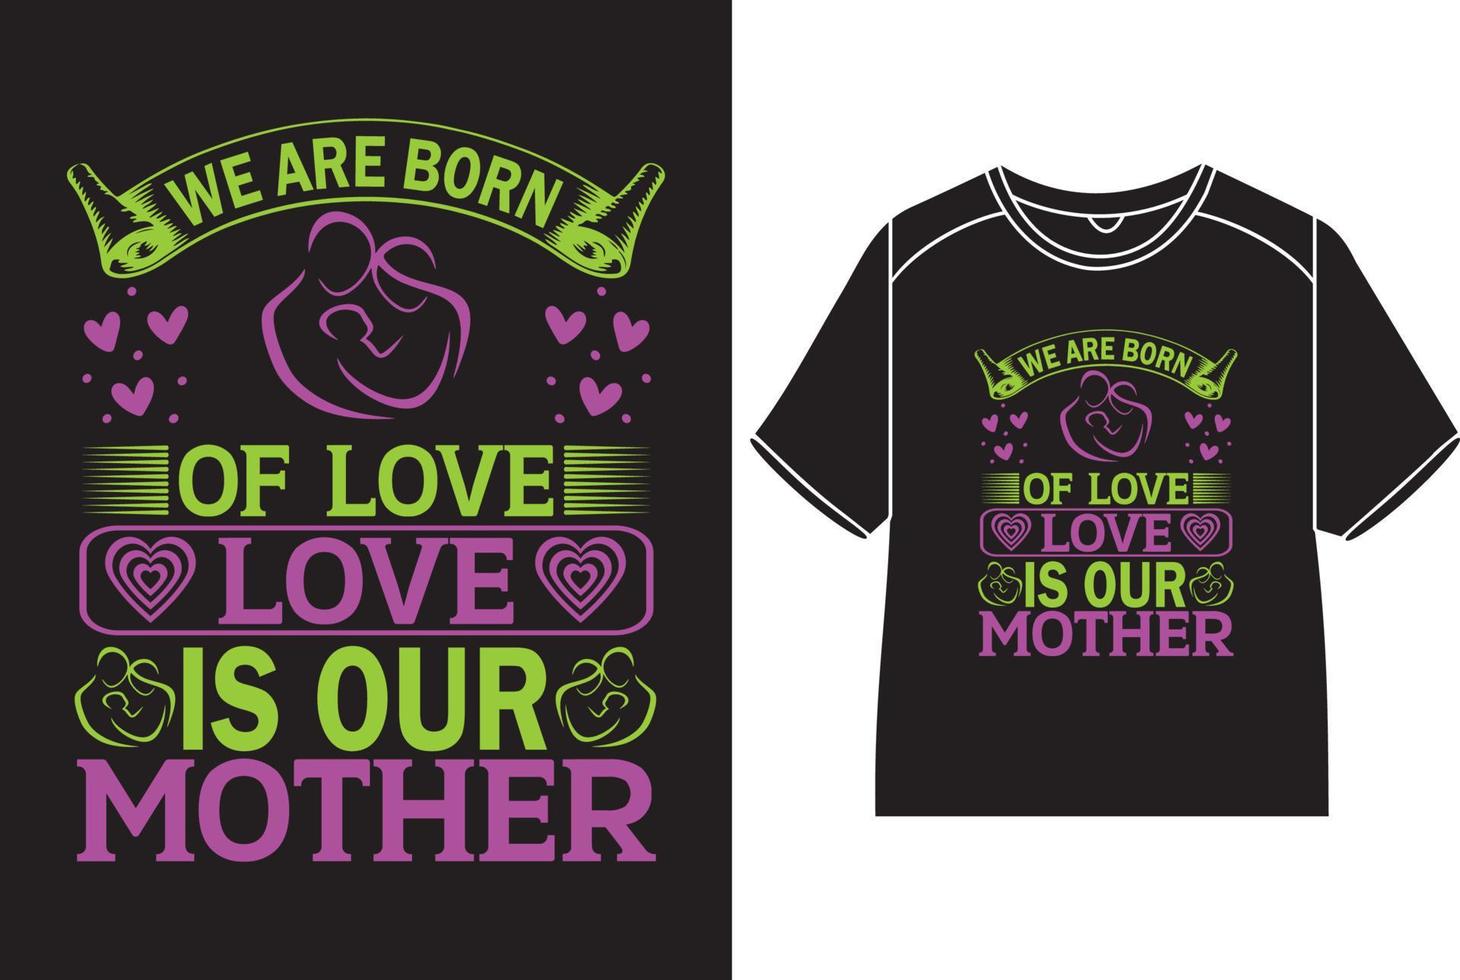 We are born of love, love is our mother T-Shirt Design vector